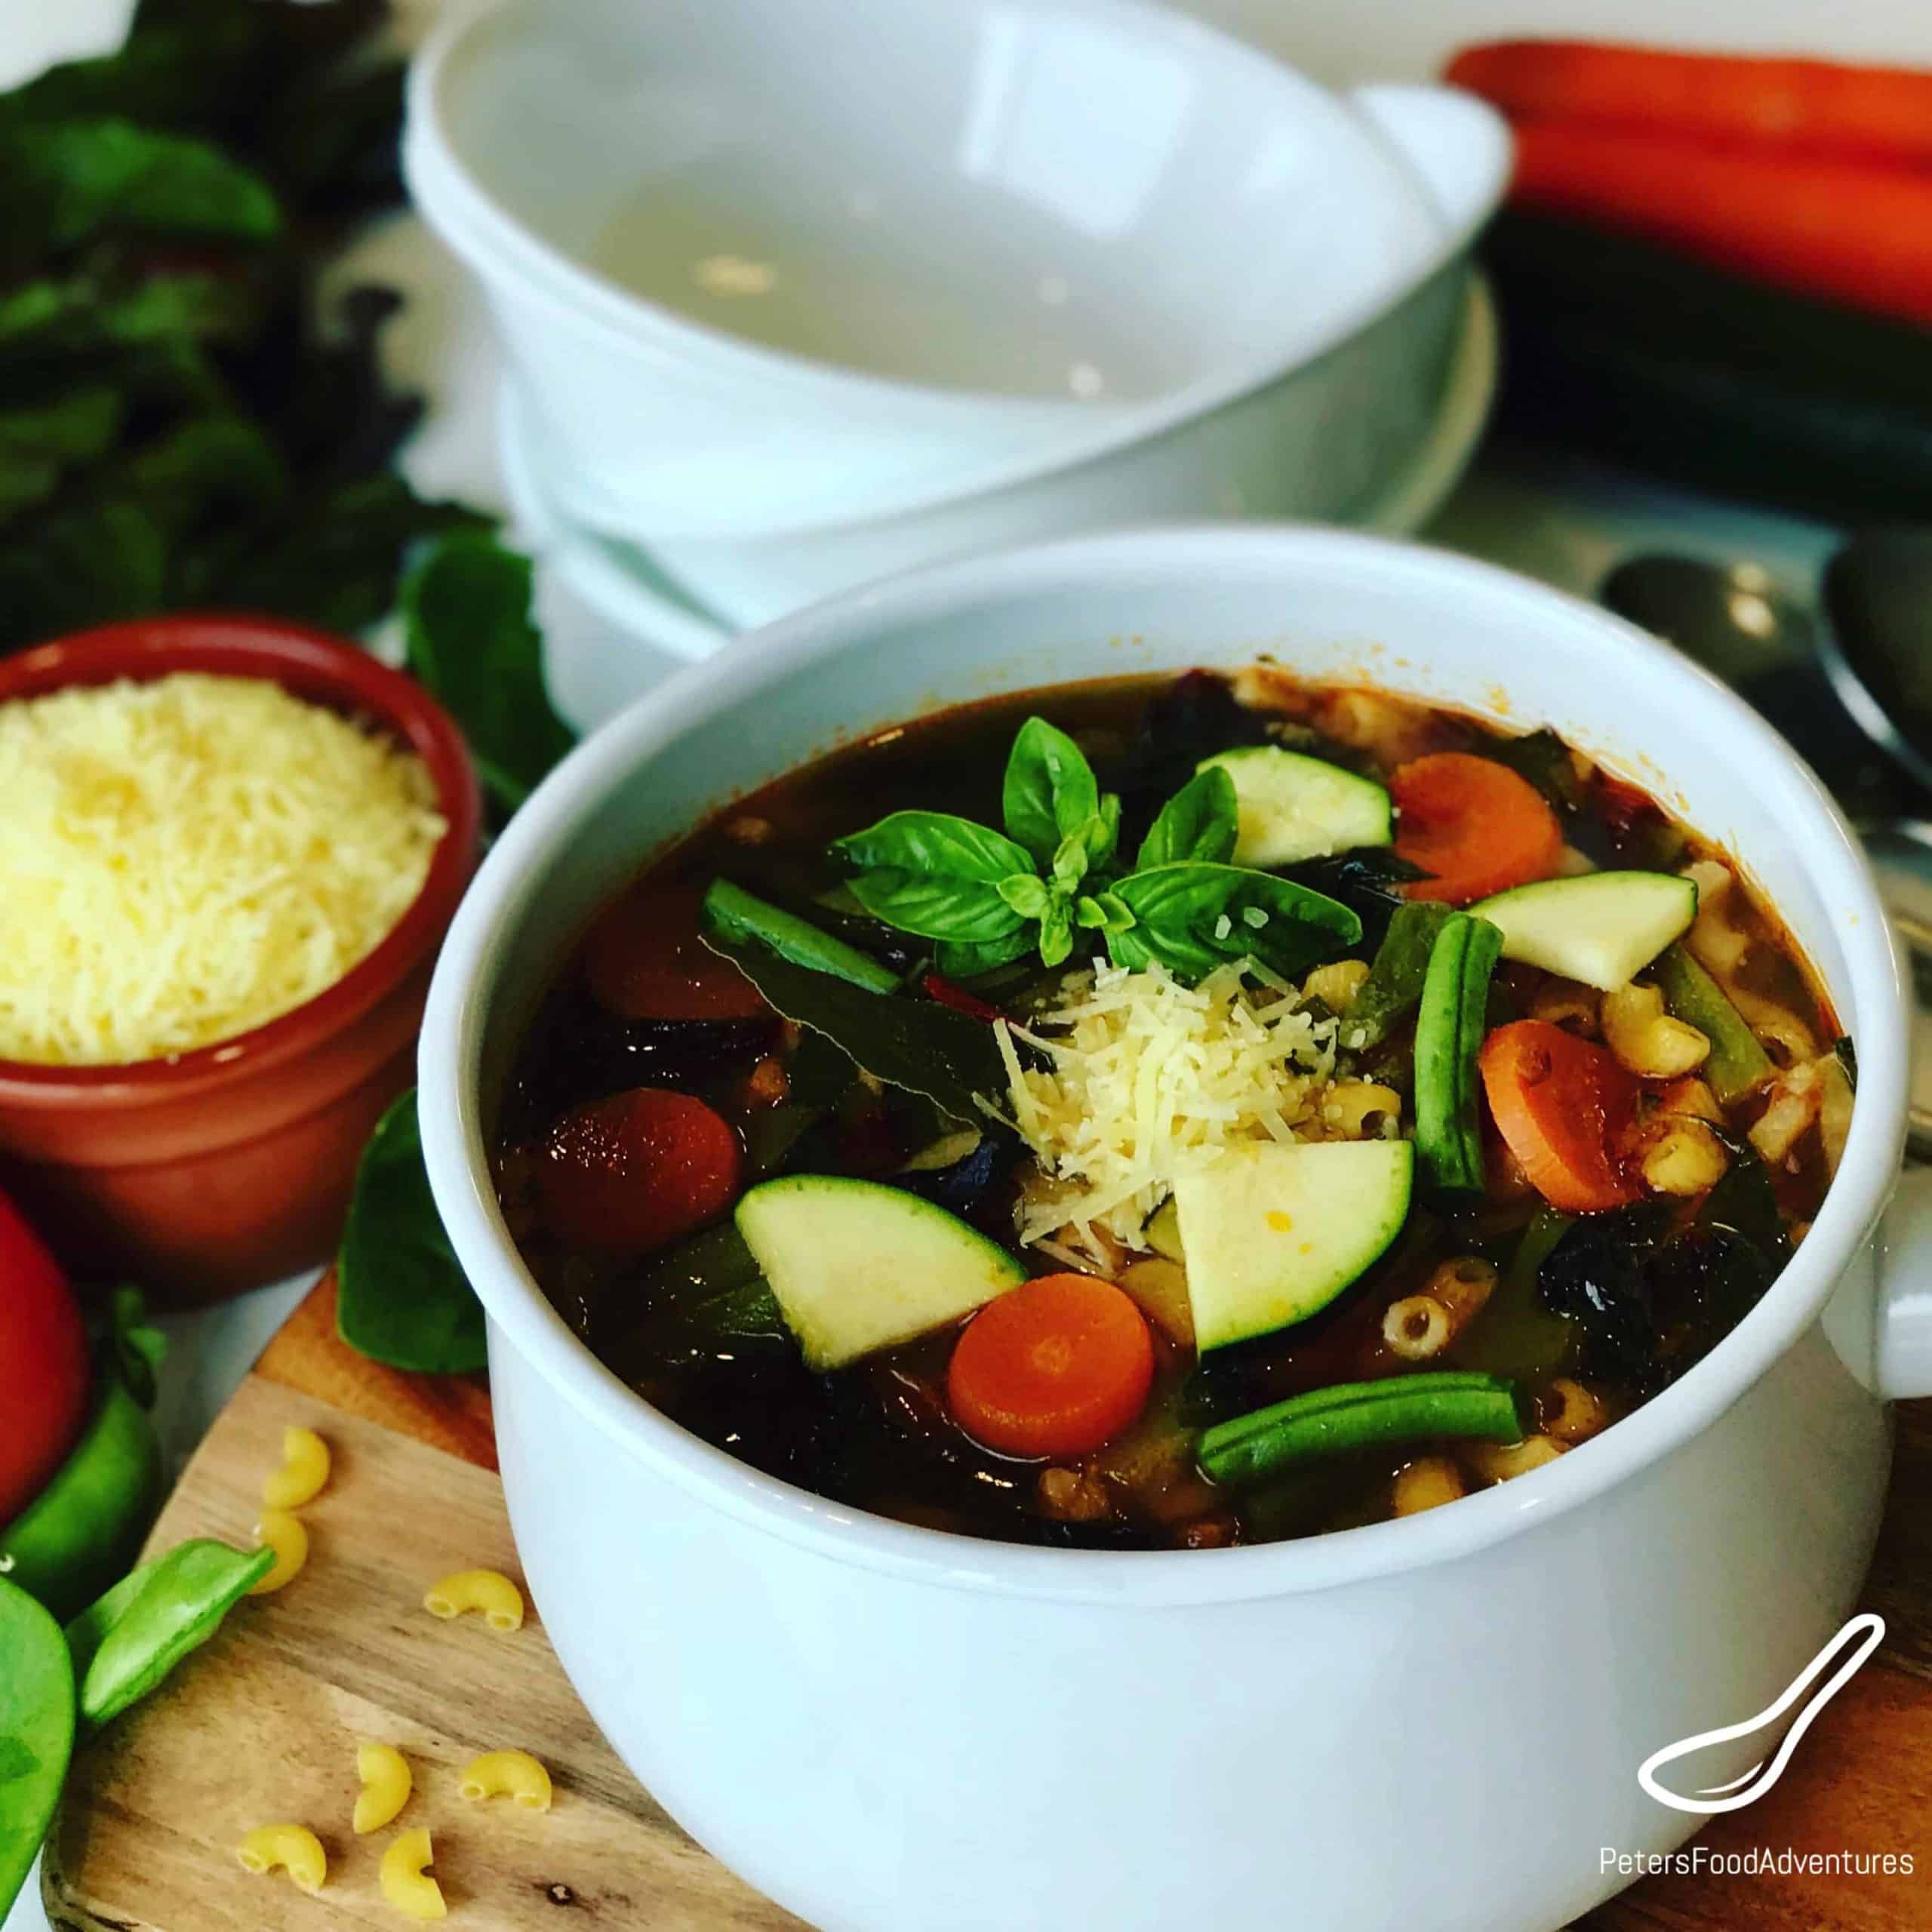 Overflowing with garden veggies? Make this Vegetable Minestrone Soup that's loaded with flavor and packed with vitamins from fresh vegetables. An Italian classic comfort food, delicious, healthy and hearty. Summer Minestrone.